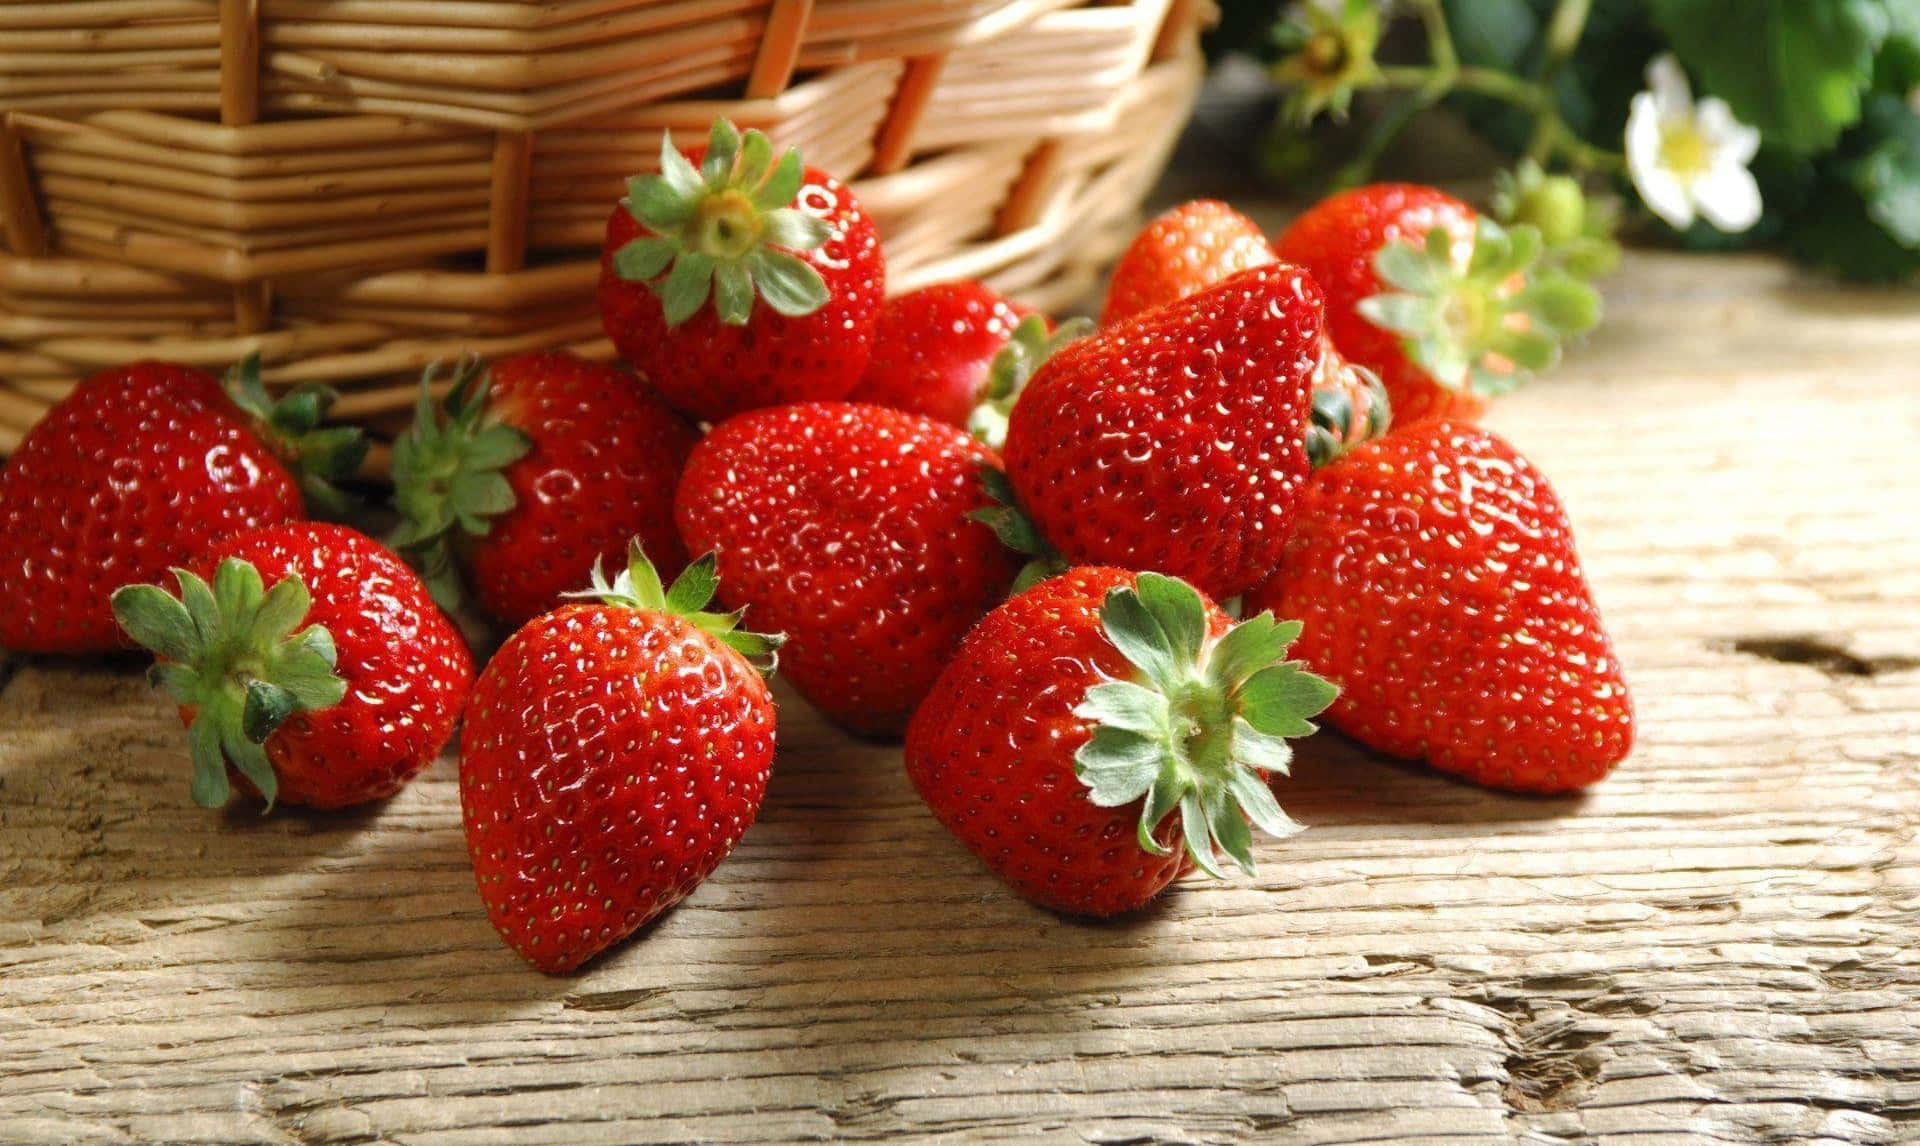 Perk up your day with fresh strawberries!